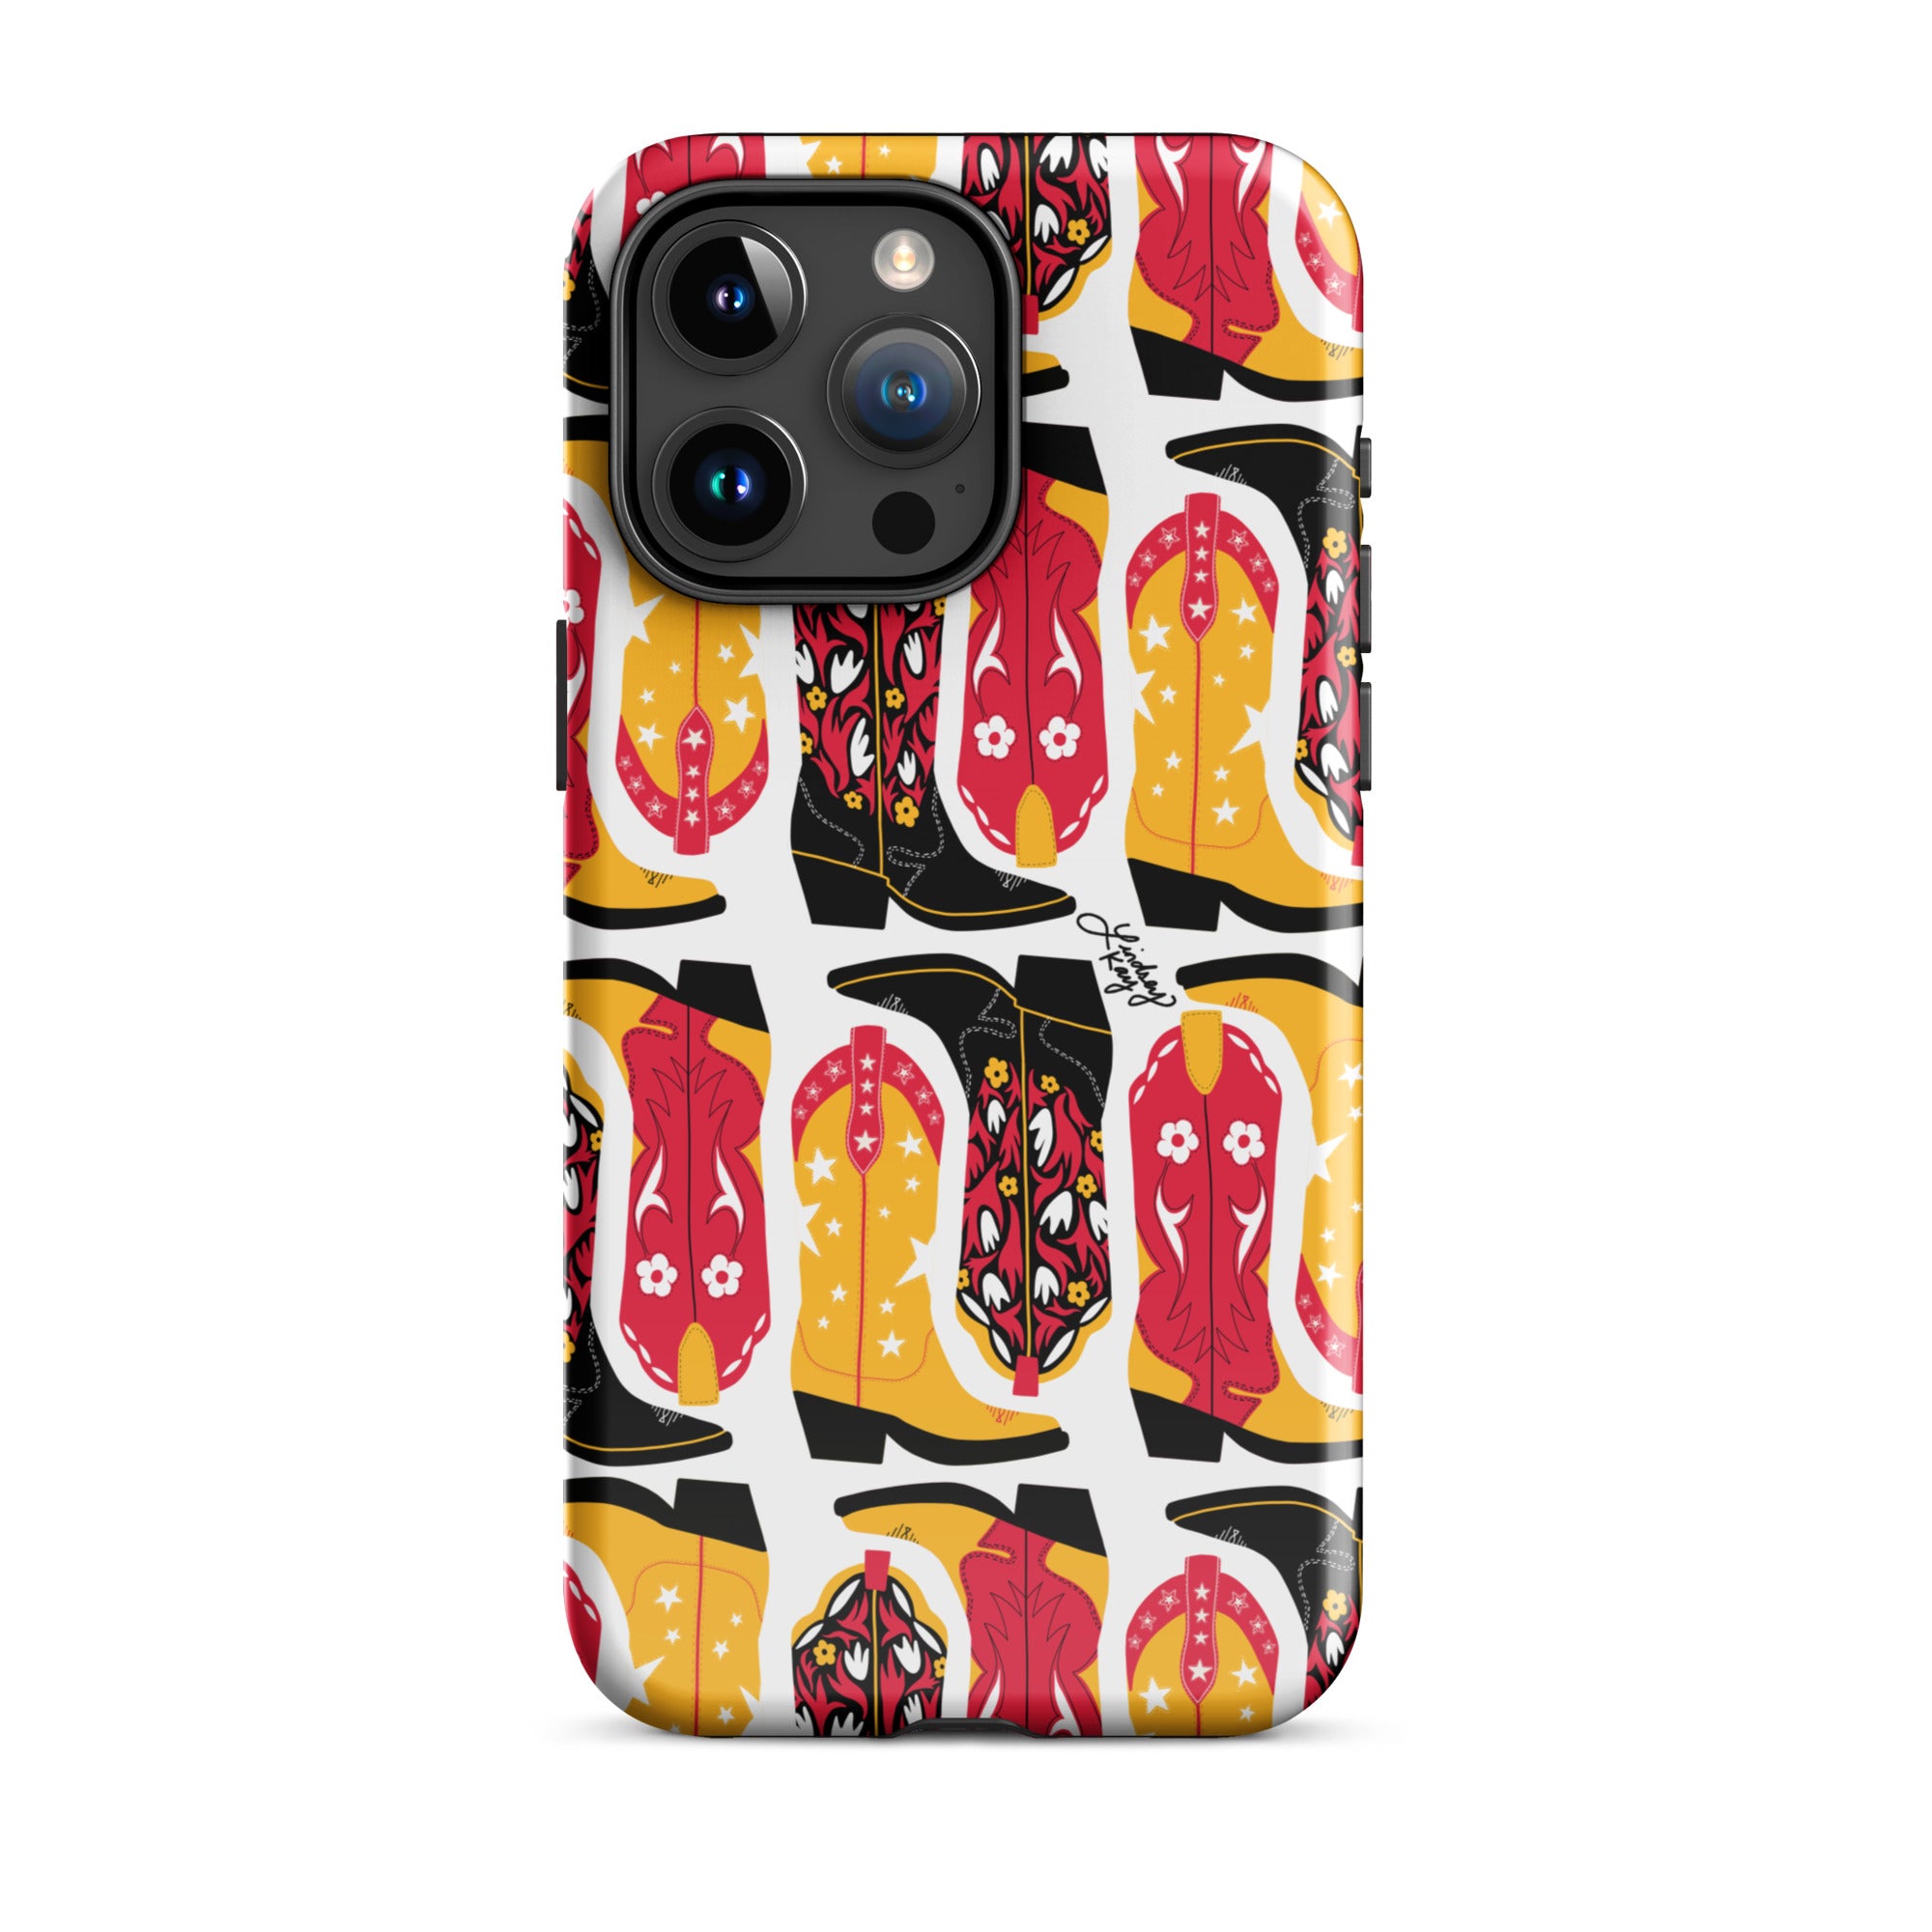 kansas city chiefs iphone case tough shockproof phone-case mobile accessories cute trendy super bowl cowboy boots taylor swift swiftie red yellow black midwest KC switftie football lindsey kay collective